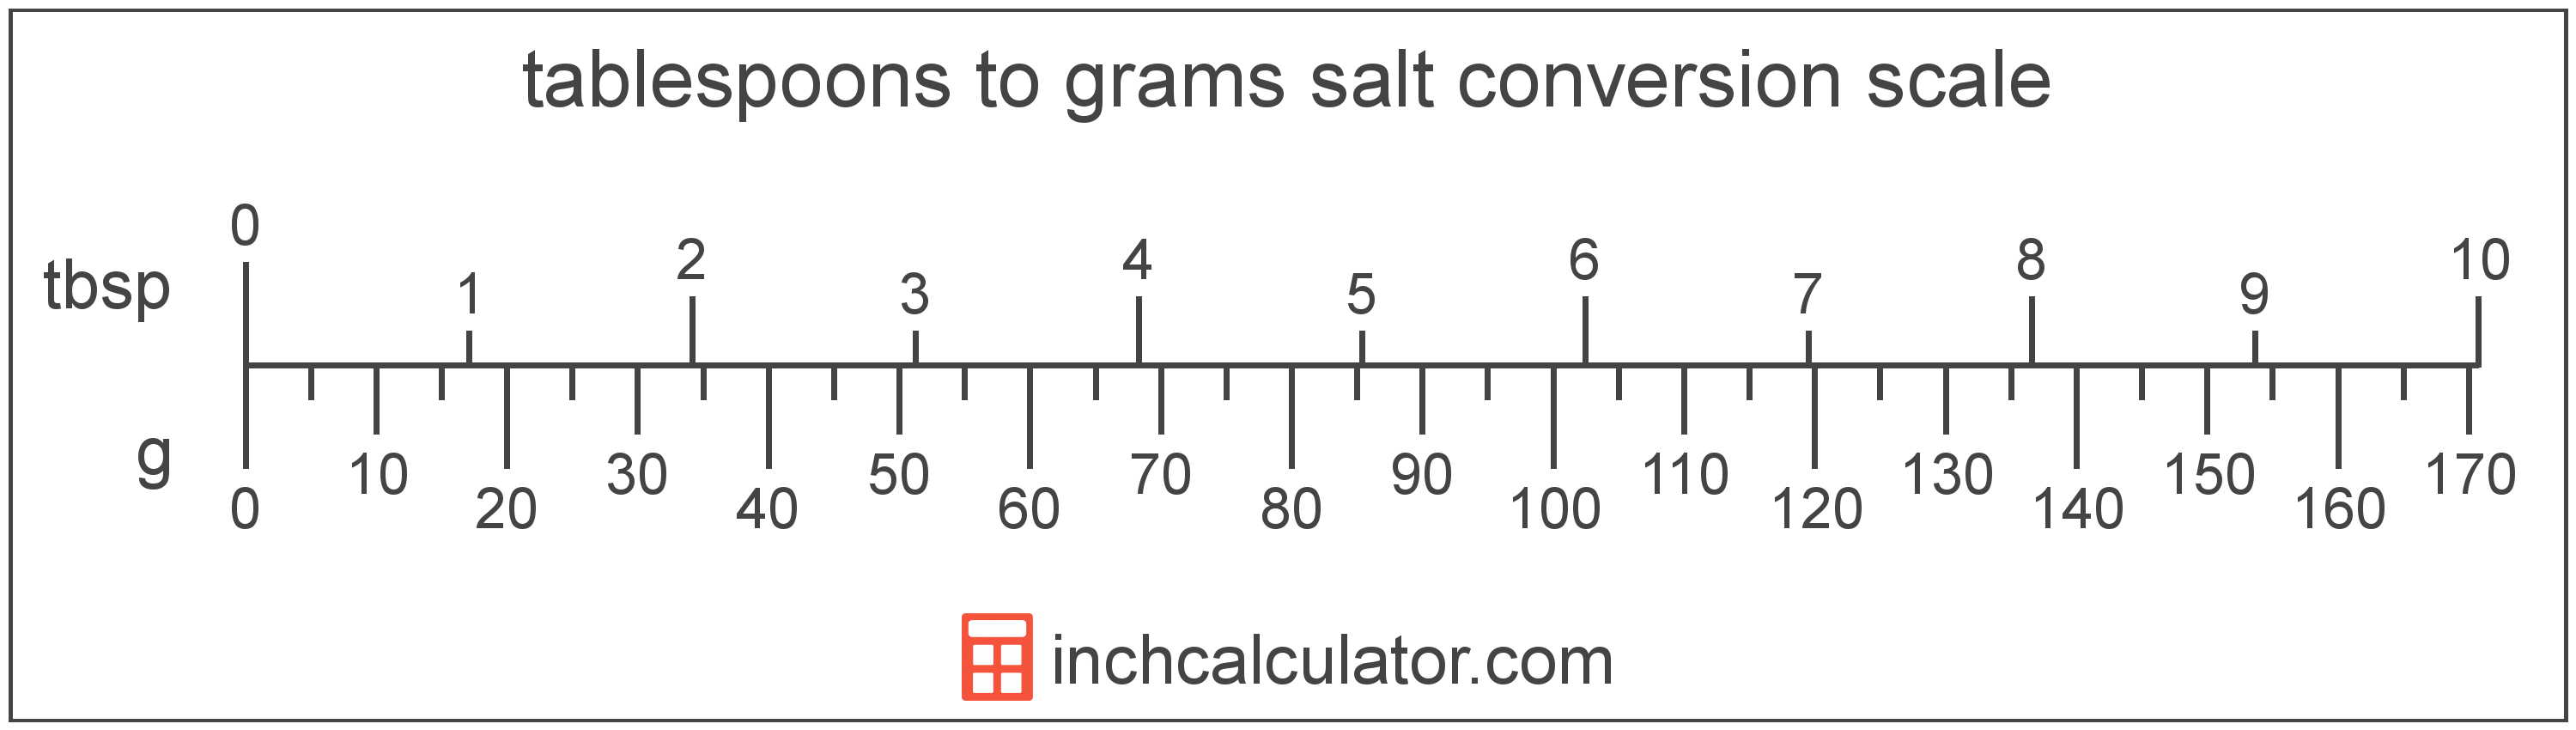 conversion scale showing tablespoons and equivalent grams salt volume values